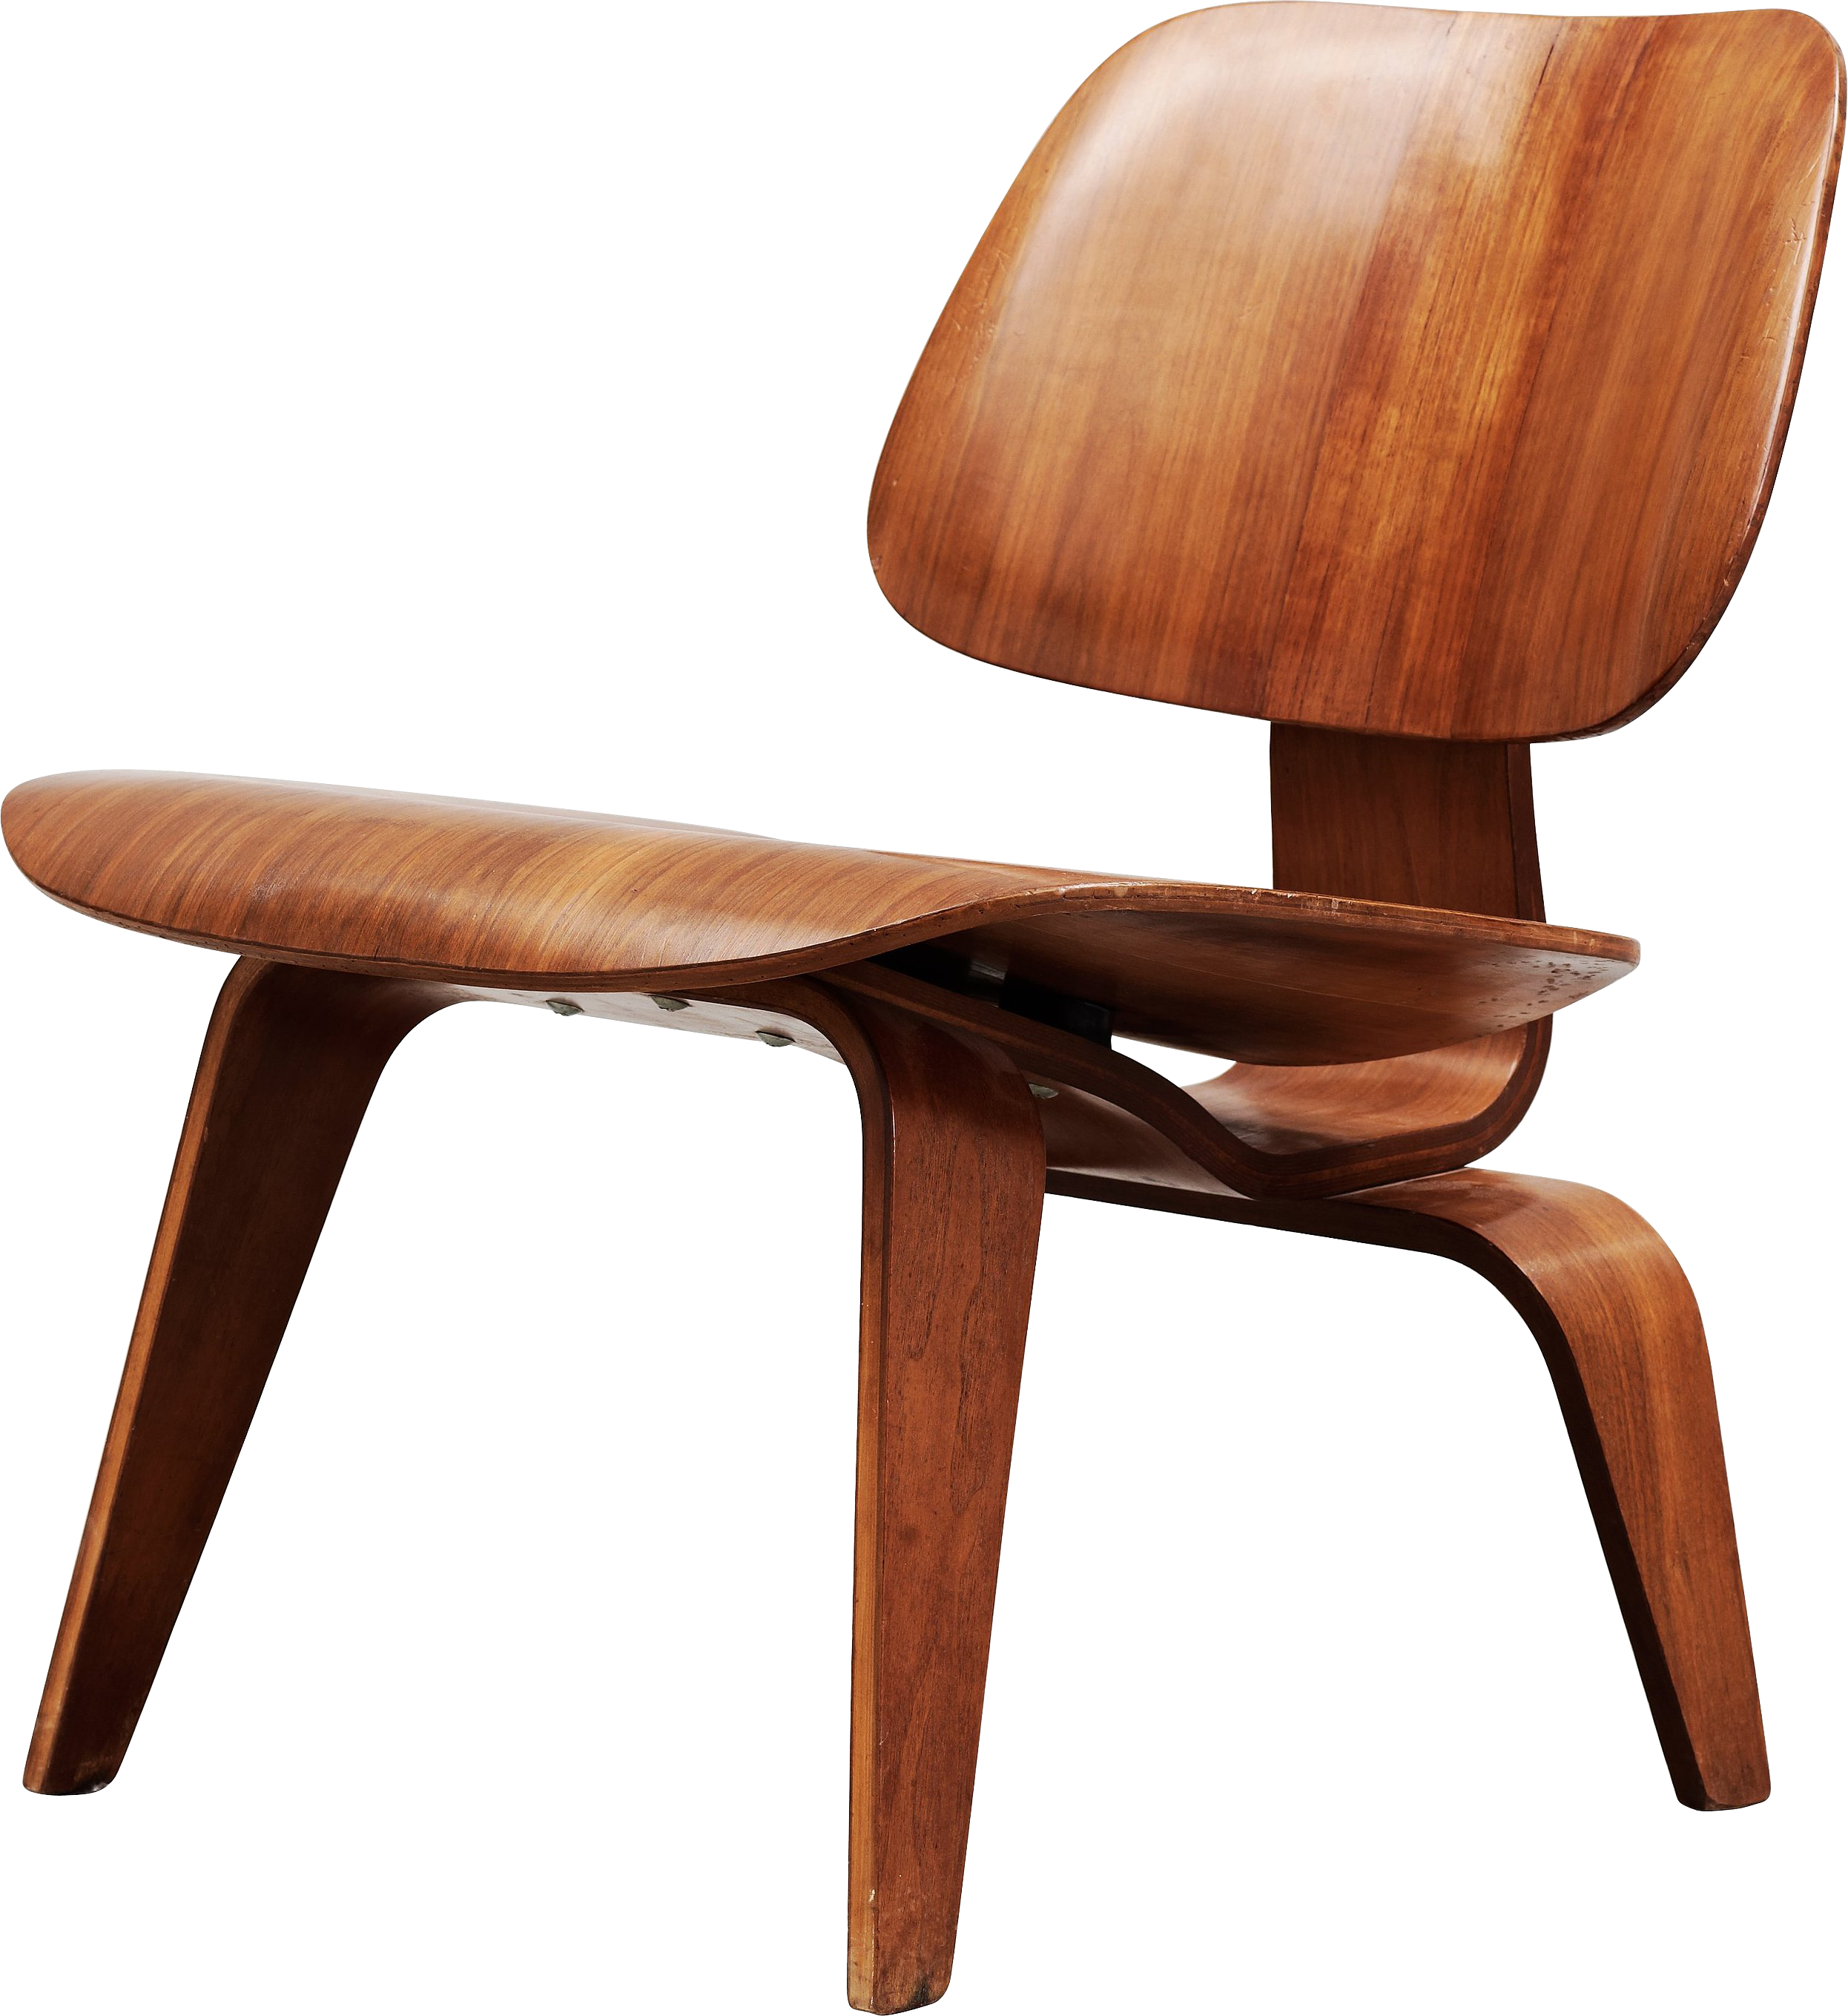 Chair Png Images Transparent Background Png Play